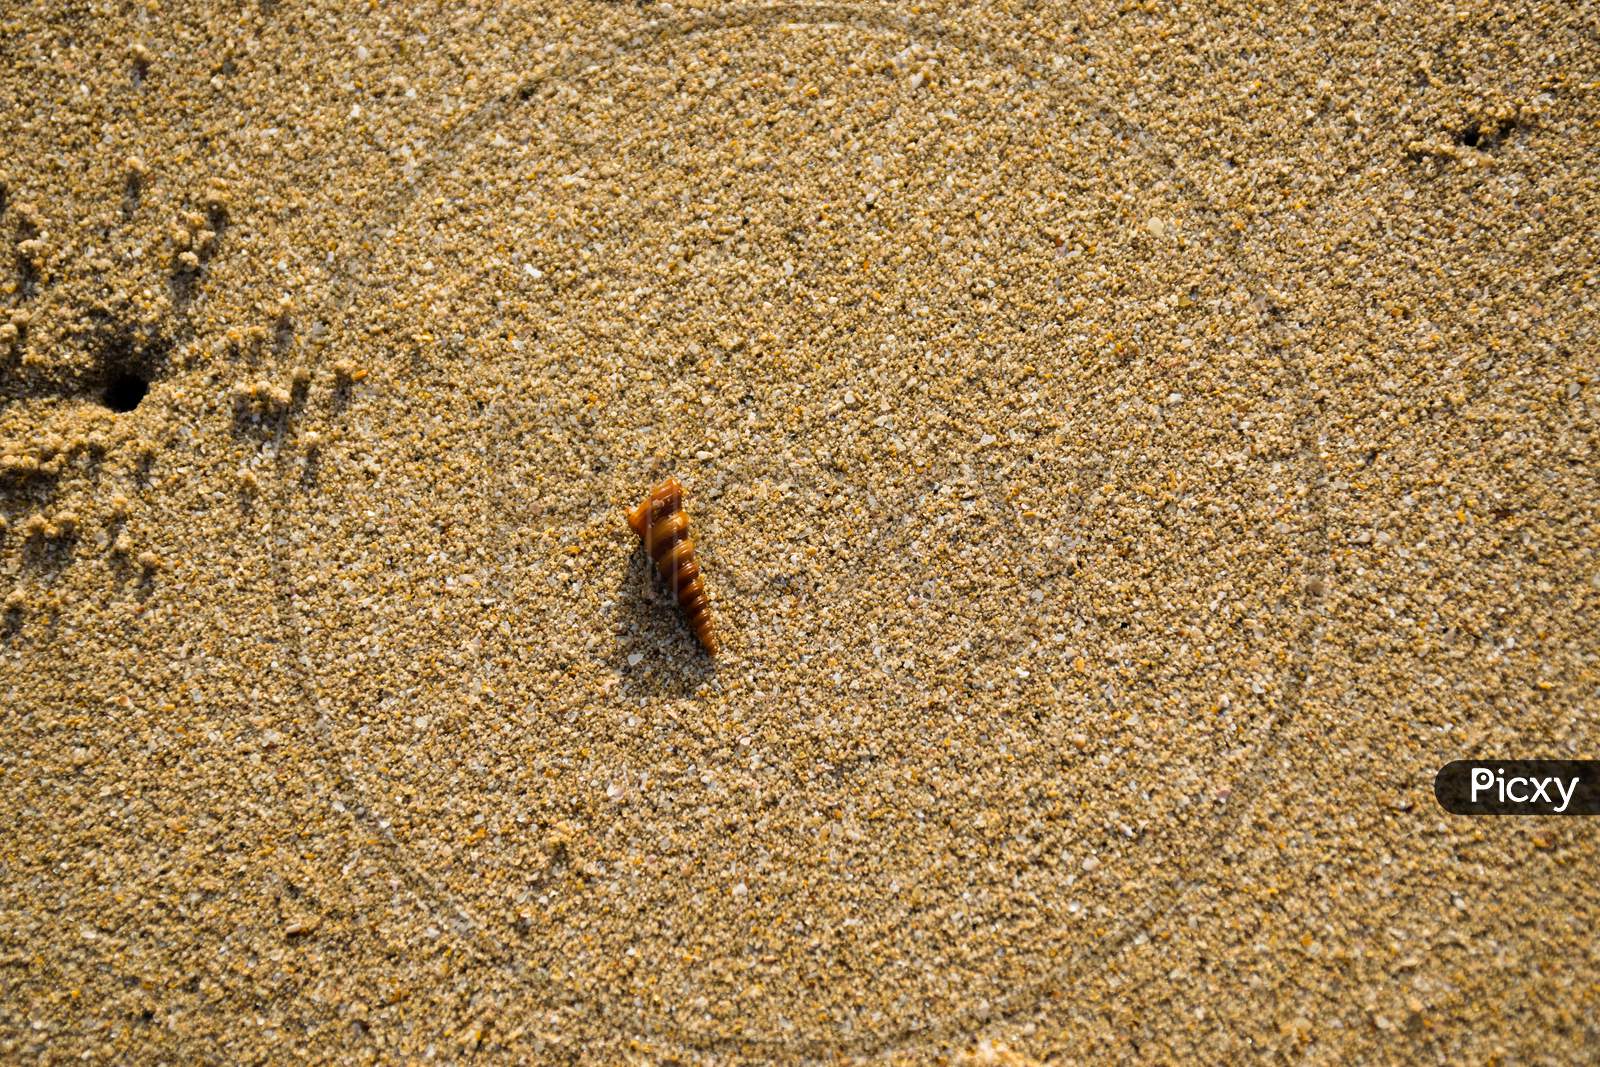 A Small Conical Shell In The Sand At Velneshwar Beach In India